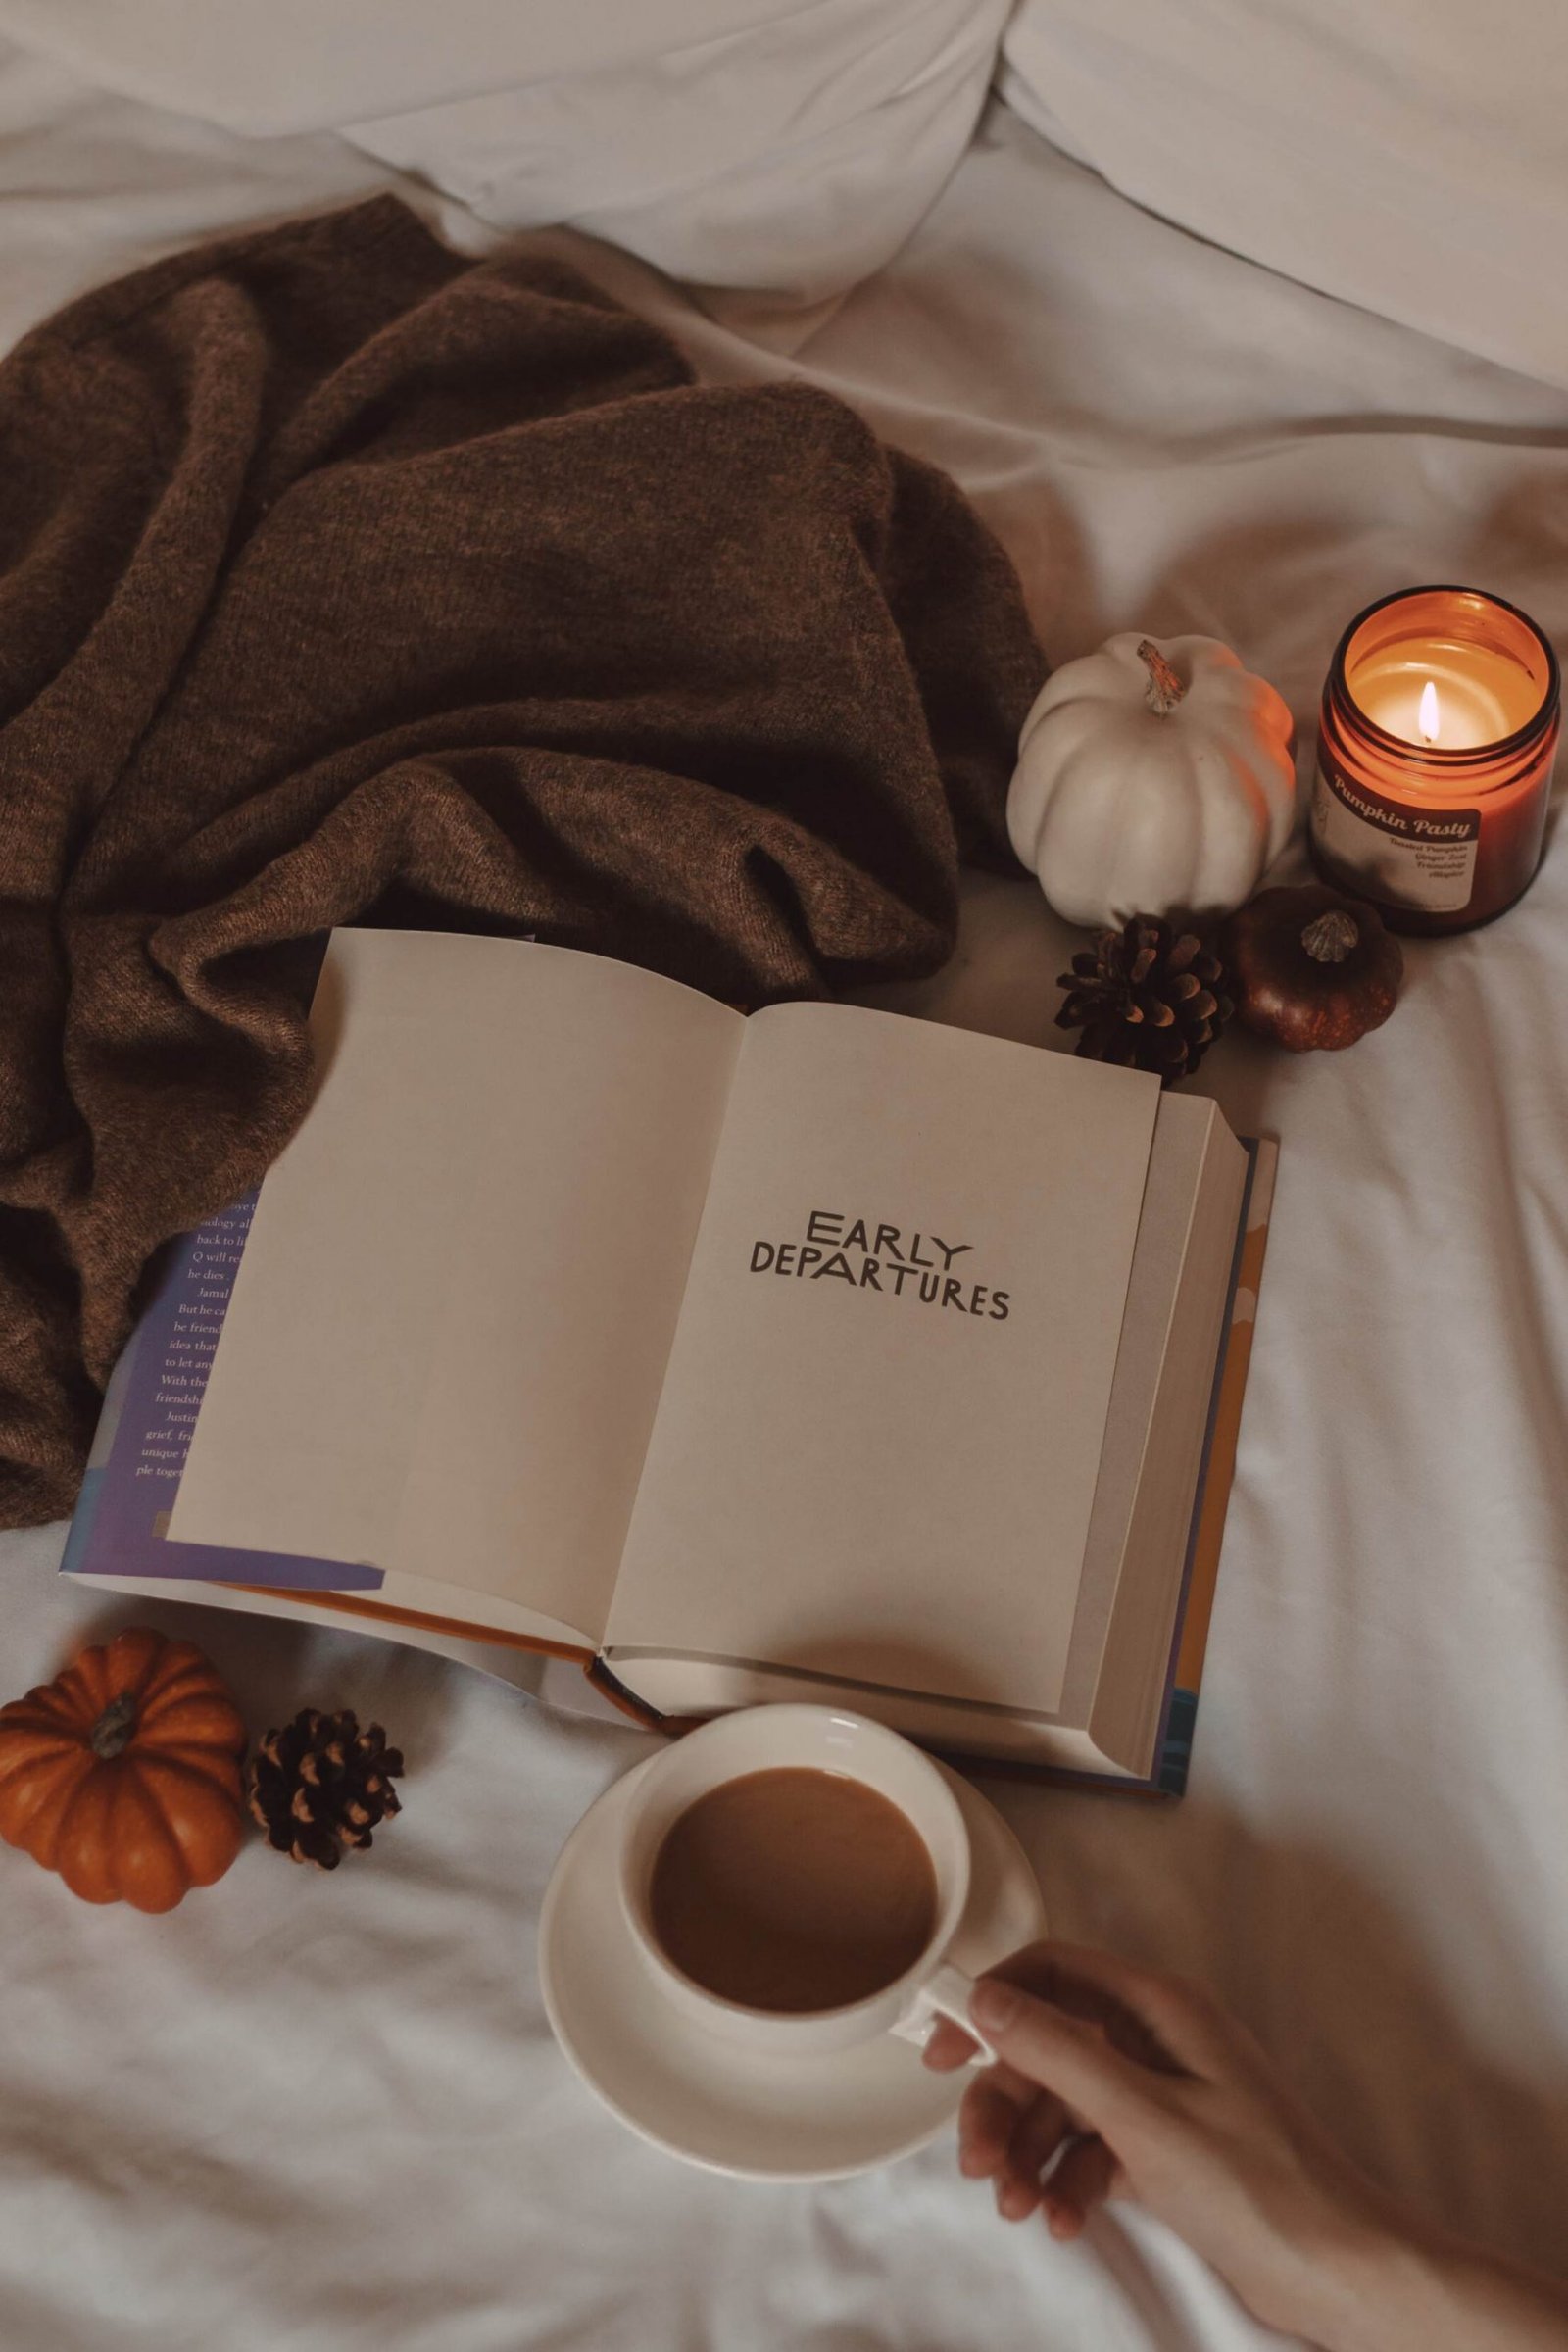 early departures book lying open with a mug of coffee, a sweater, mini pumpkins, and a lit candle